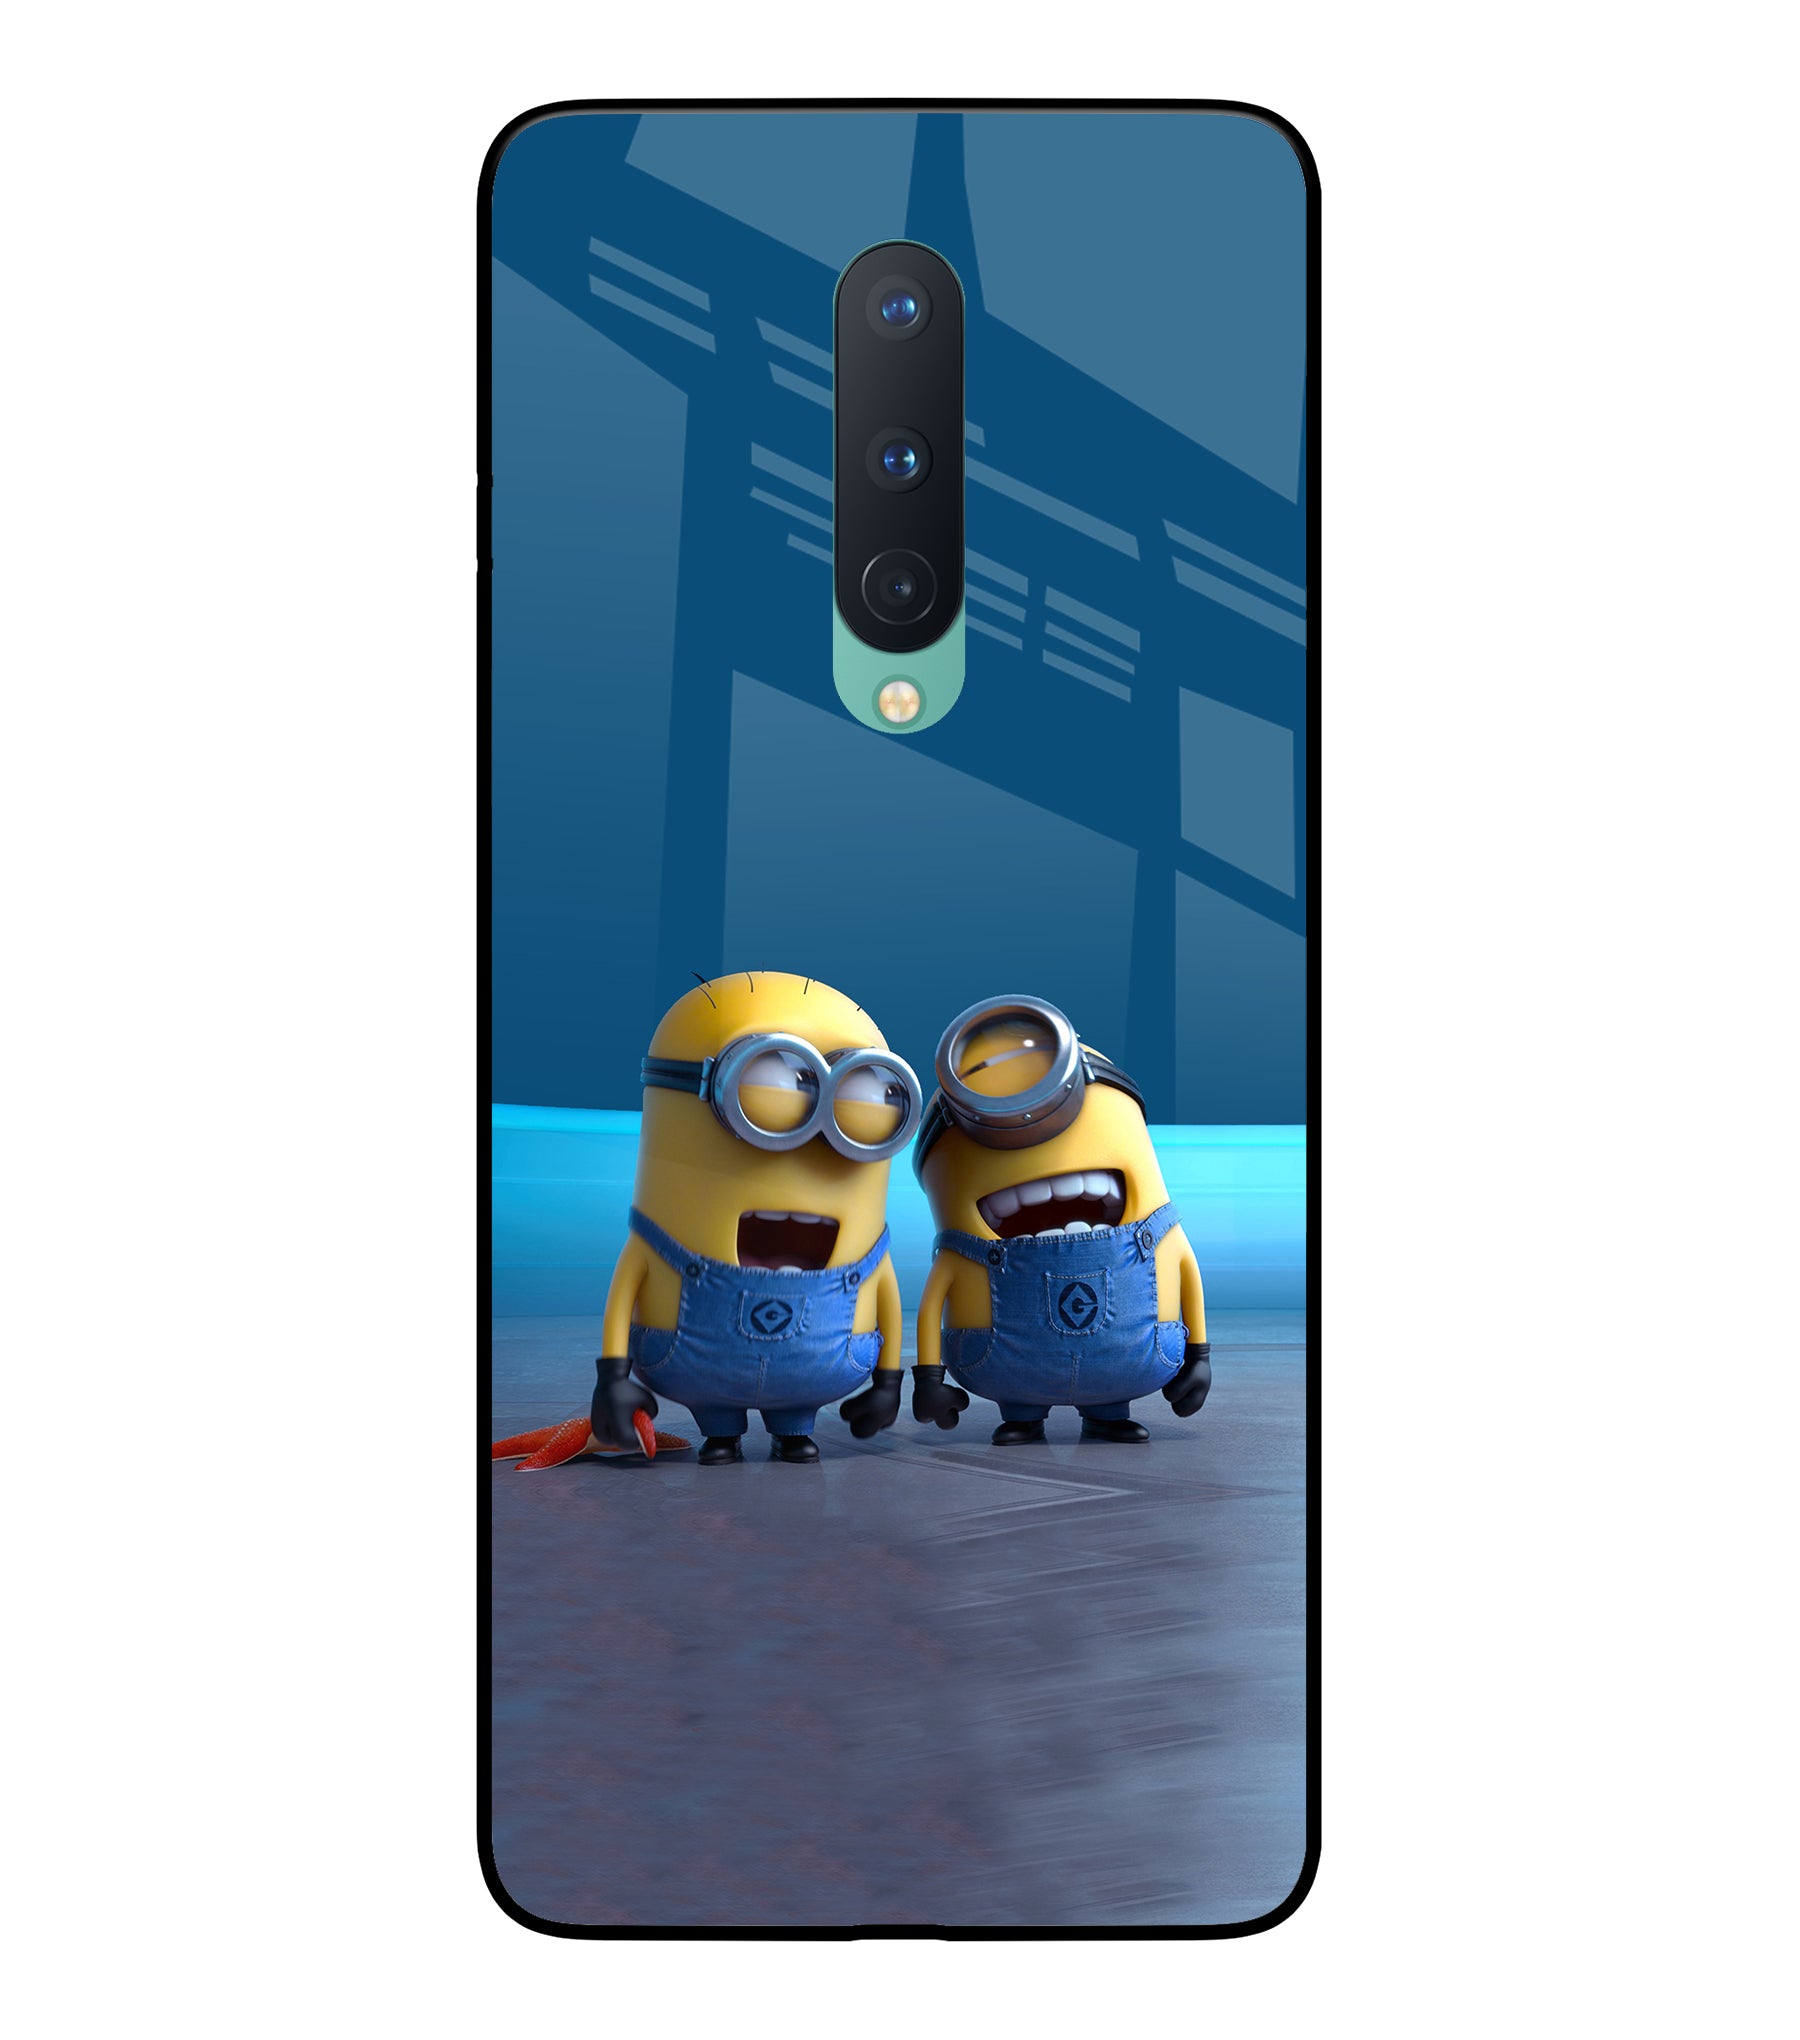 Minion Laughing Oneplus 8 Glass Cover